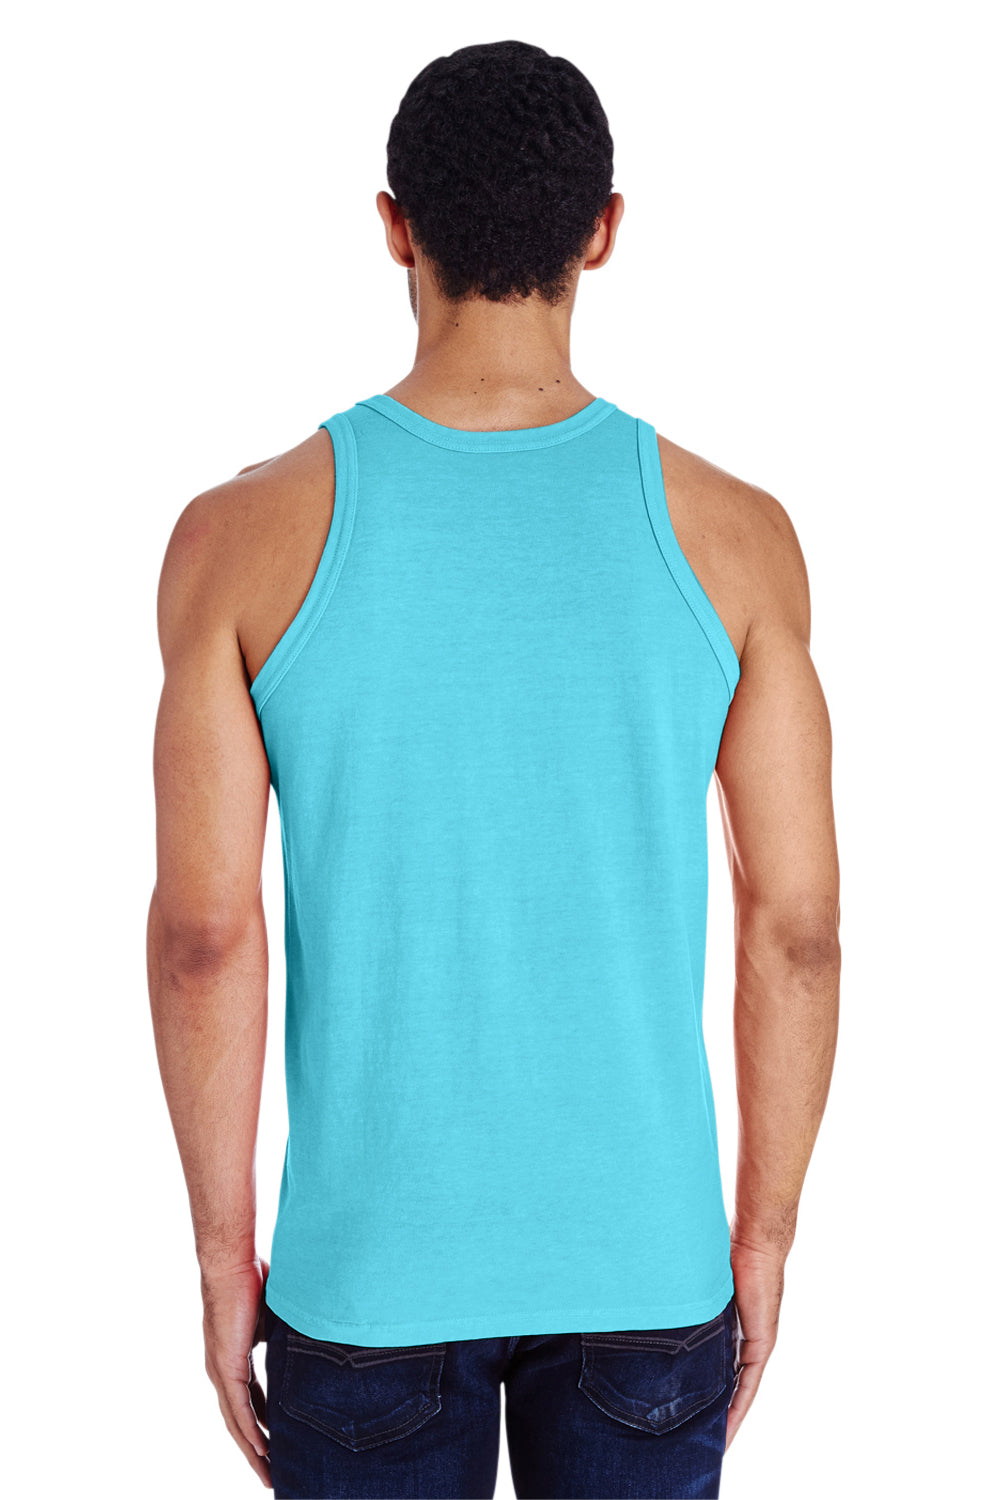 ComfortWash by Hanes GDH300 Tank Top Freshwater Blue Back